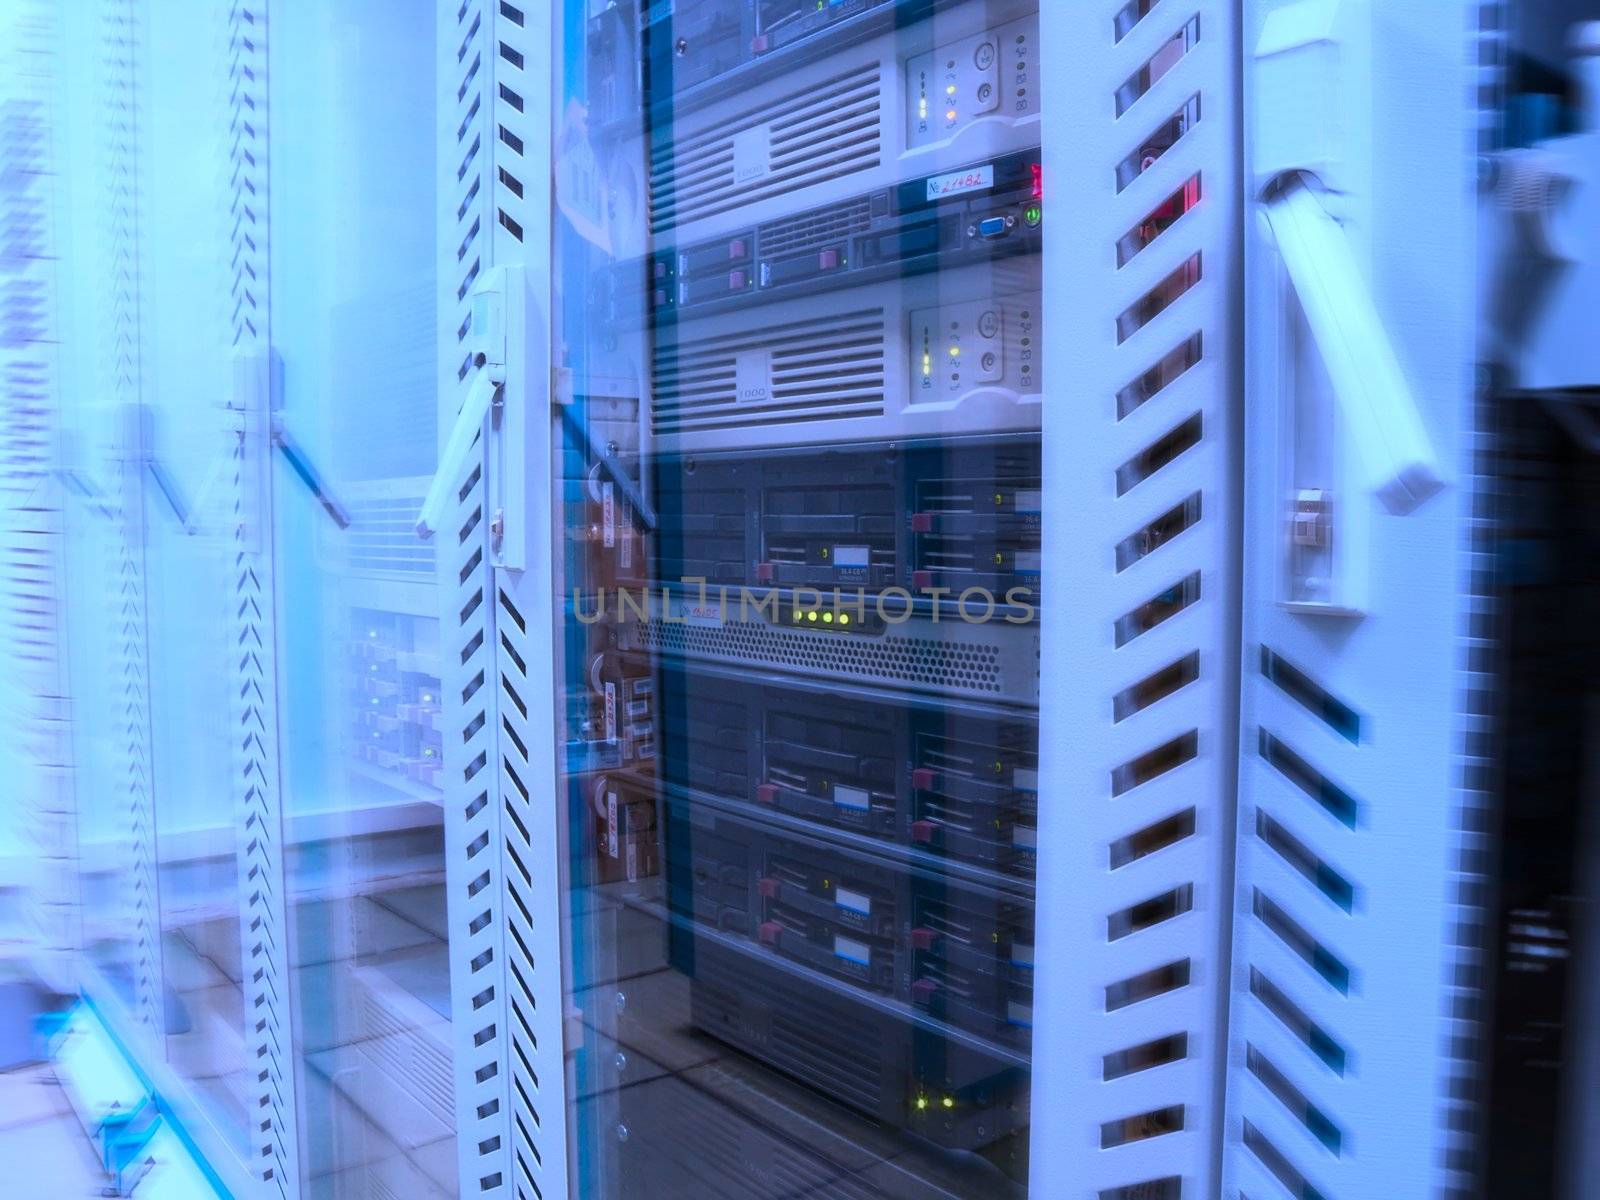 Servers in the data center in blue